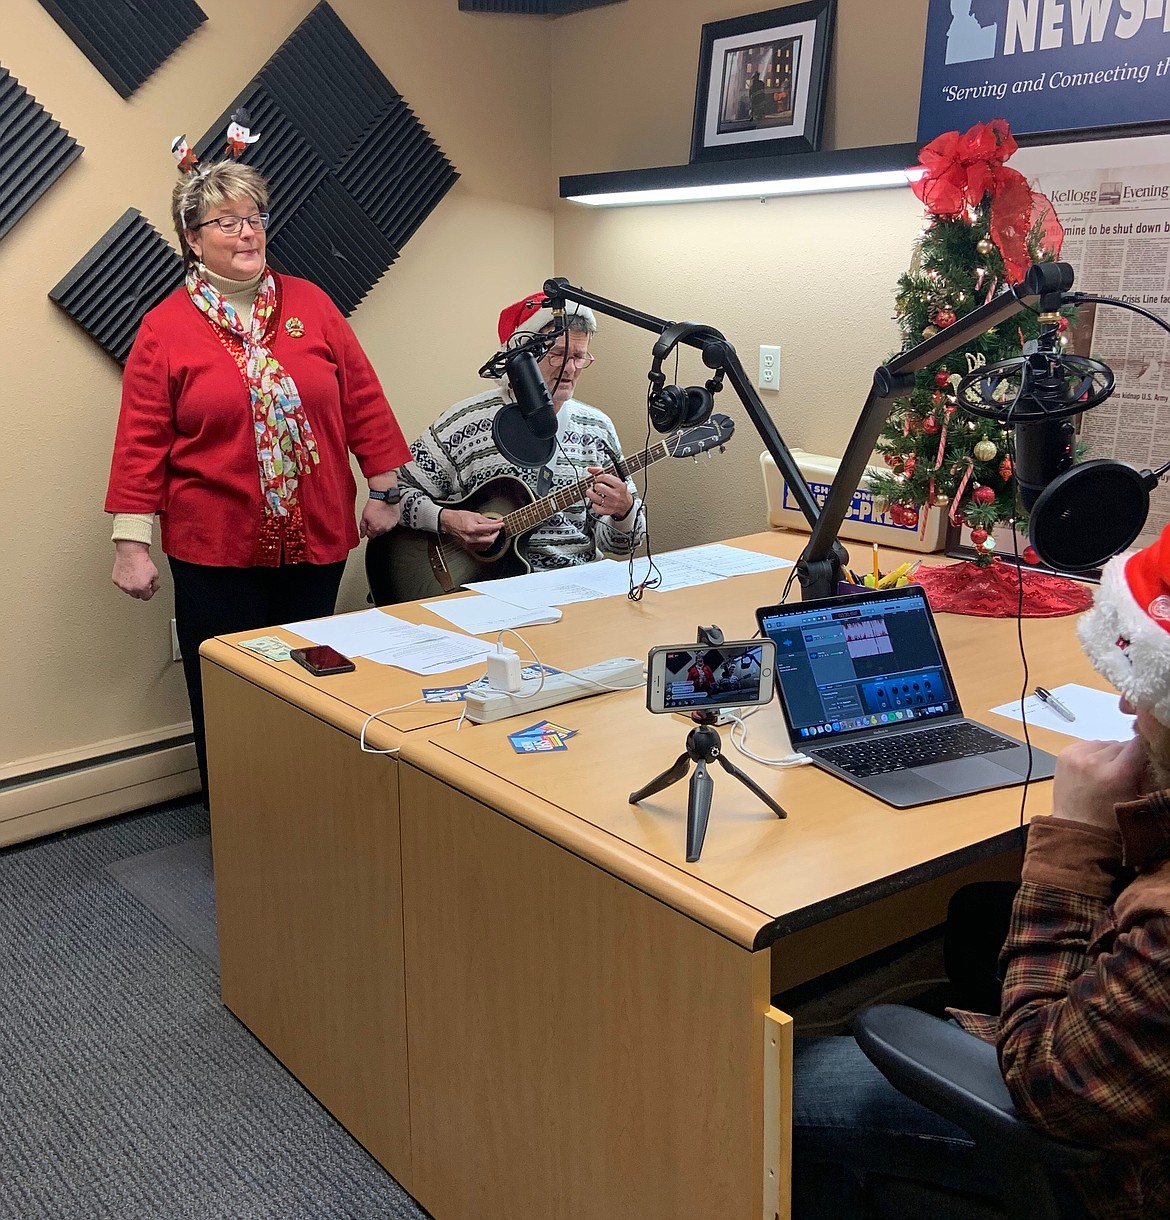 Photo by ARIANA McDONALD
The Sixth Street Theatre&#146;s Paul and Carol Roberts got in some holiday studio time at the SNP Now office.